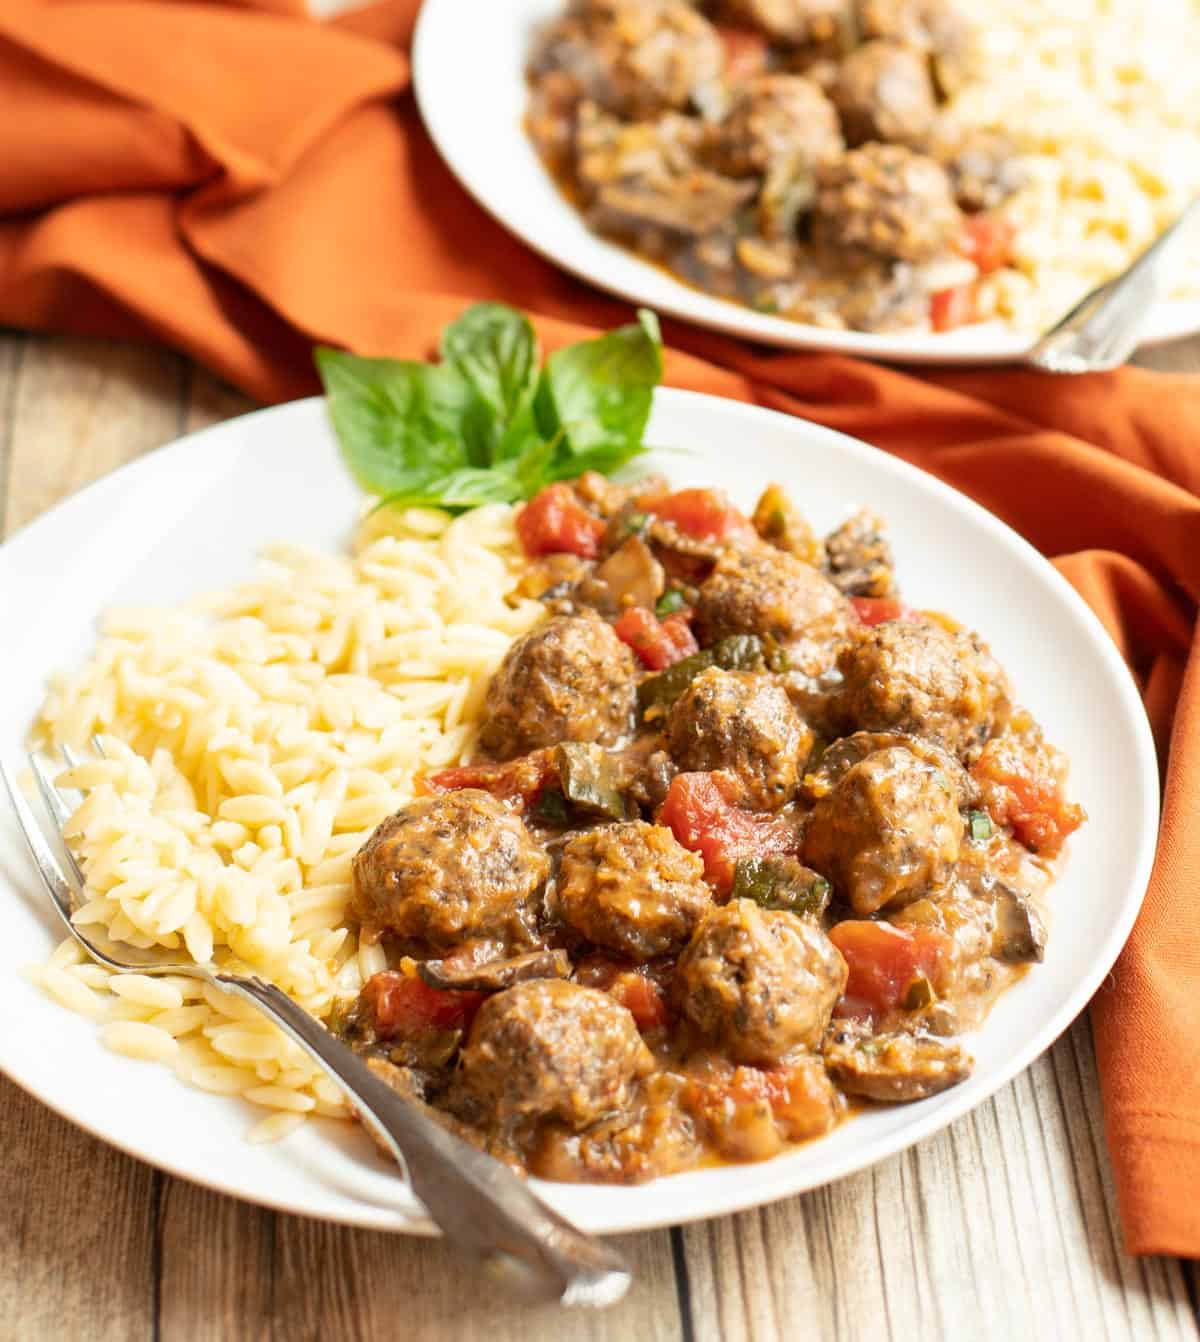 Plate of Mediterraean Meatball Ratatouille with orzo